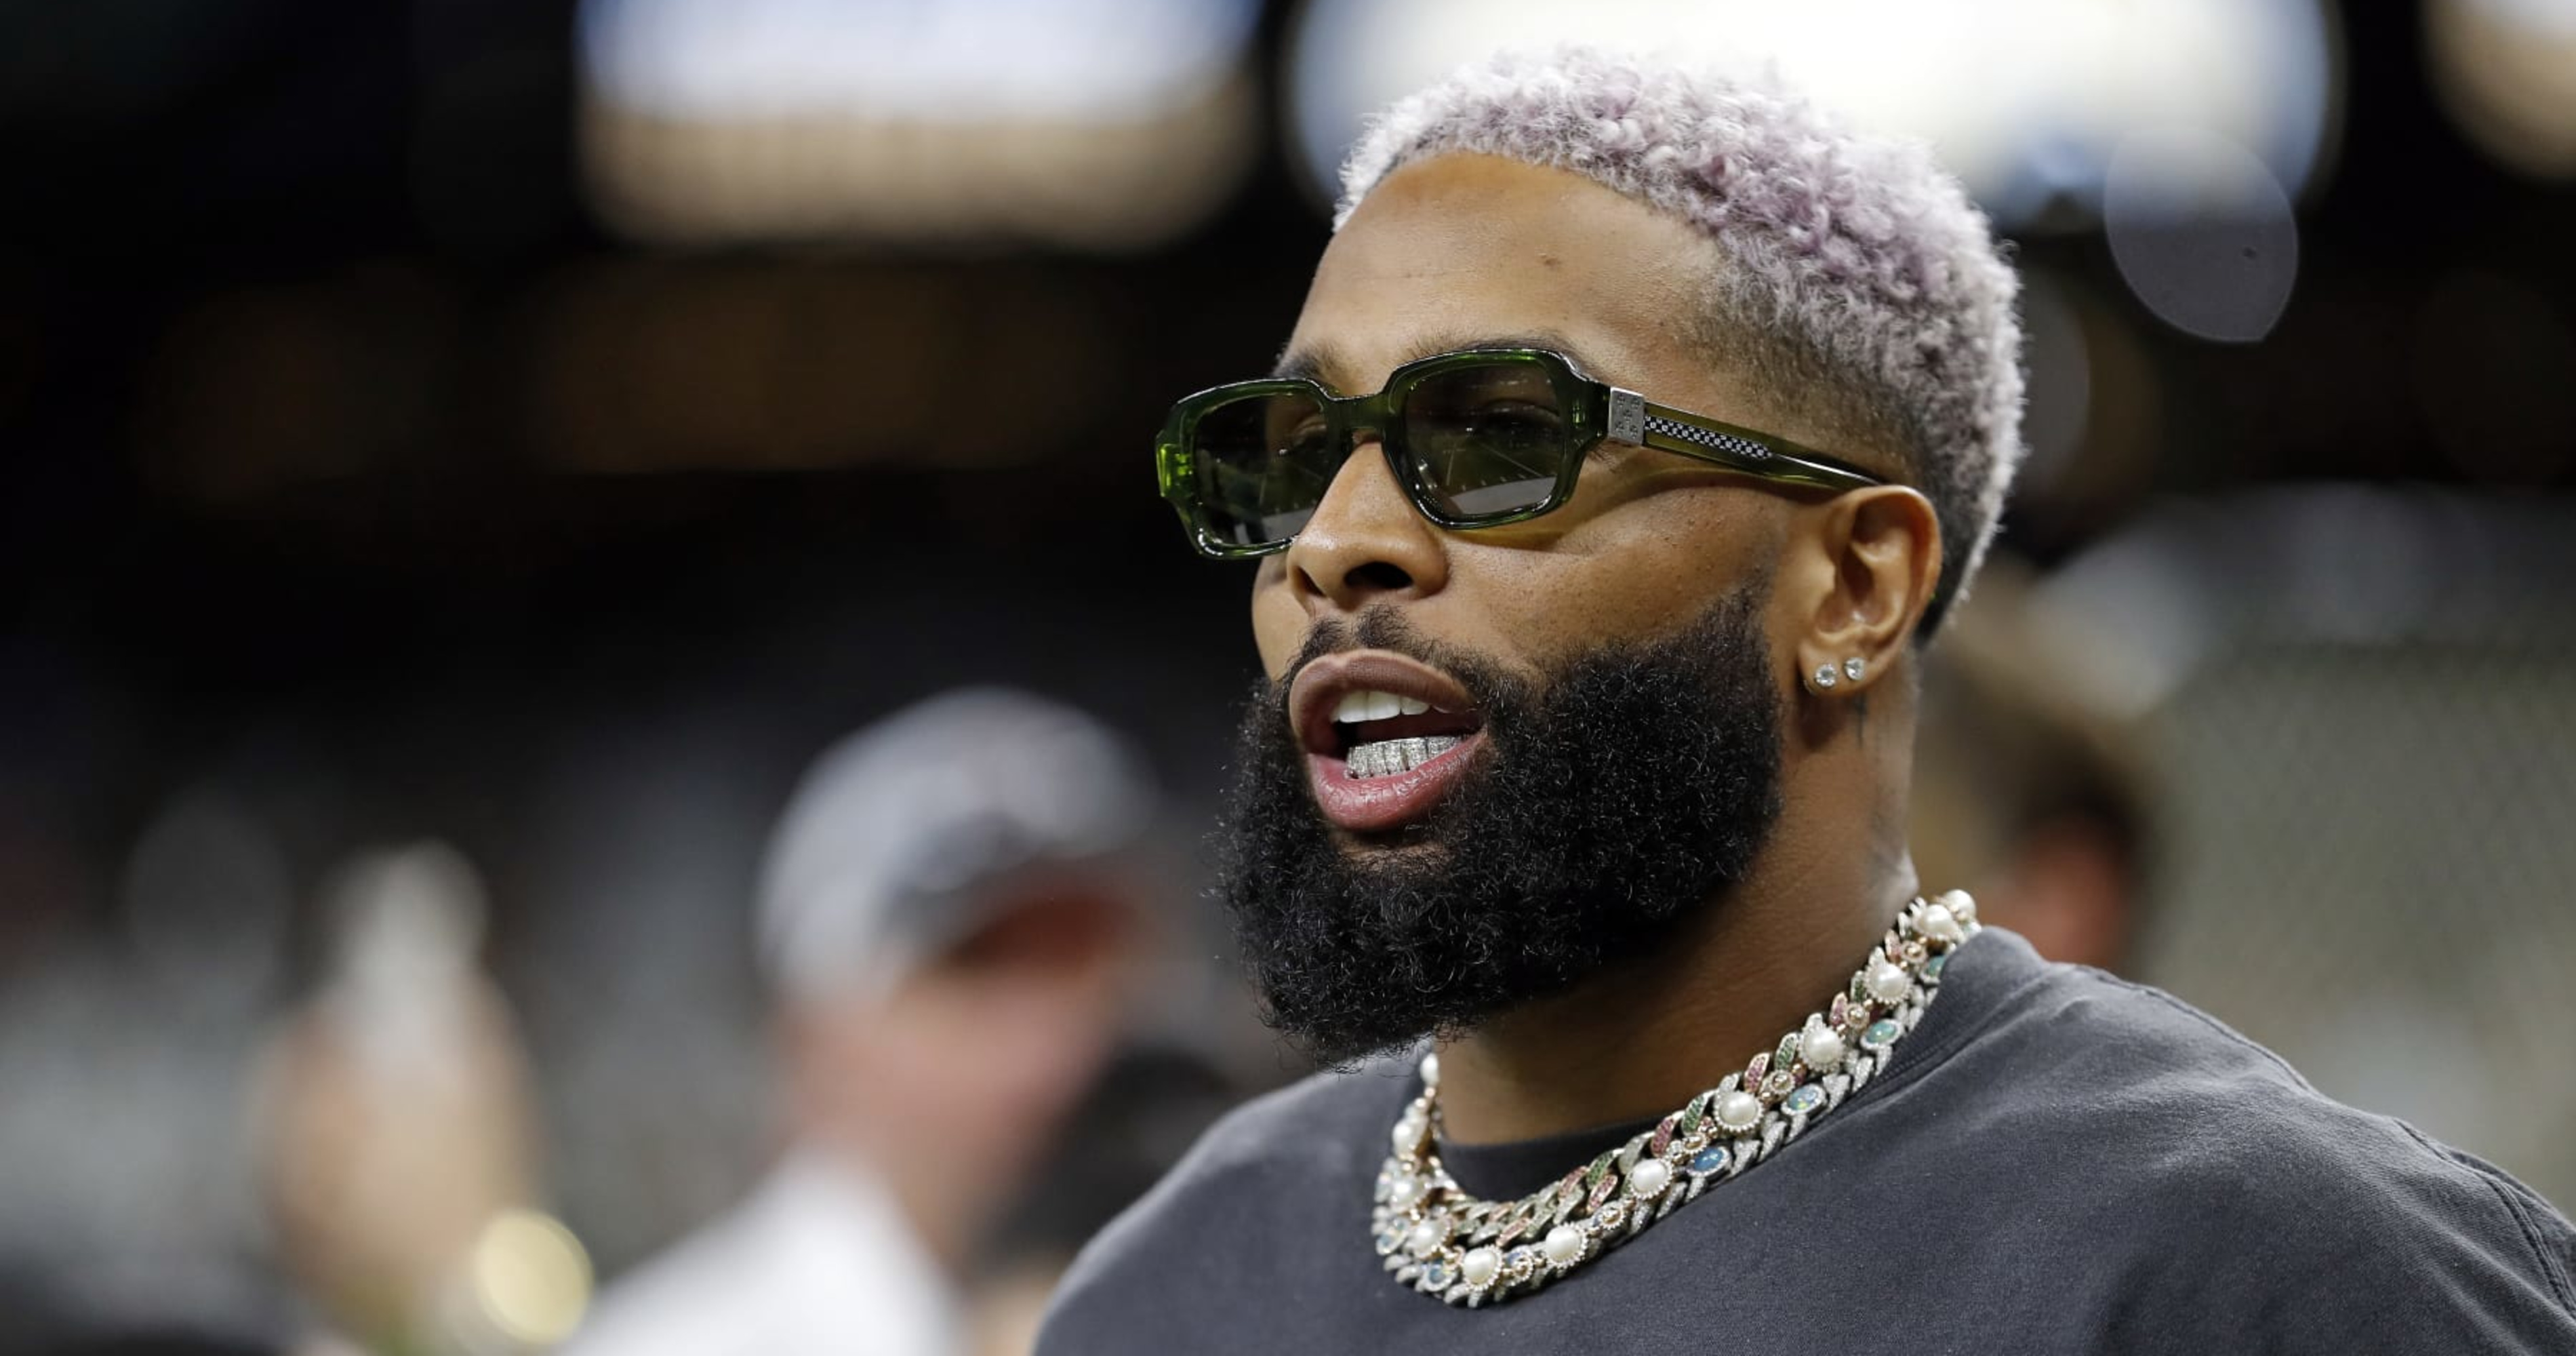 Police: Odell Beckham Jr. Removed from Airplane over Fear He 'Was Seriously Ill'